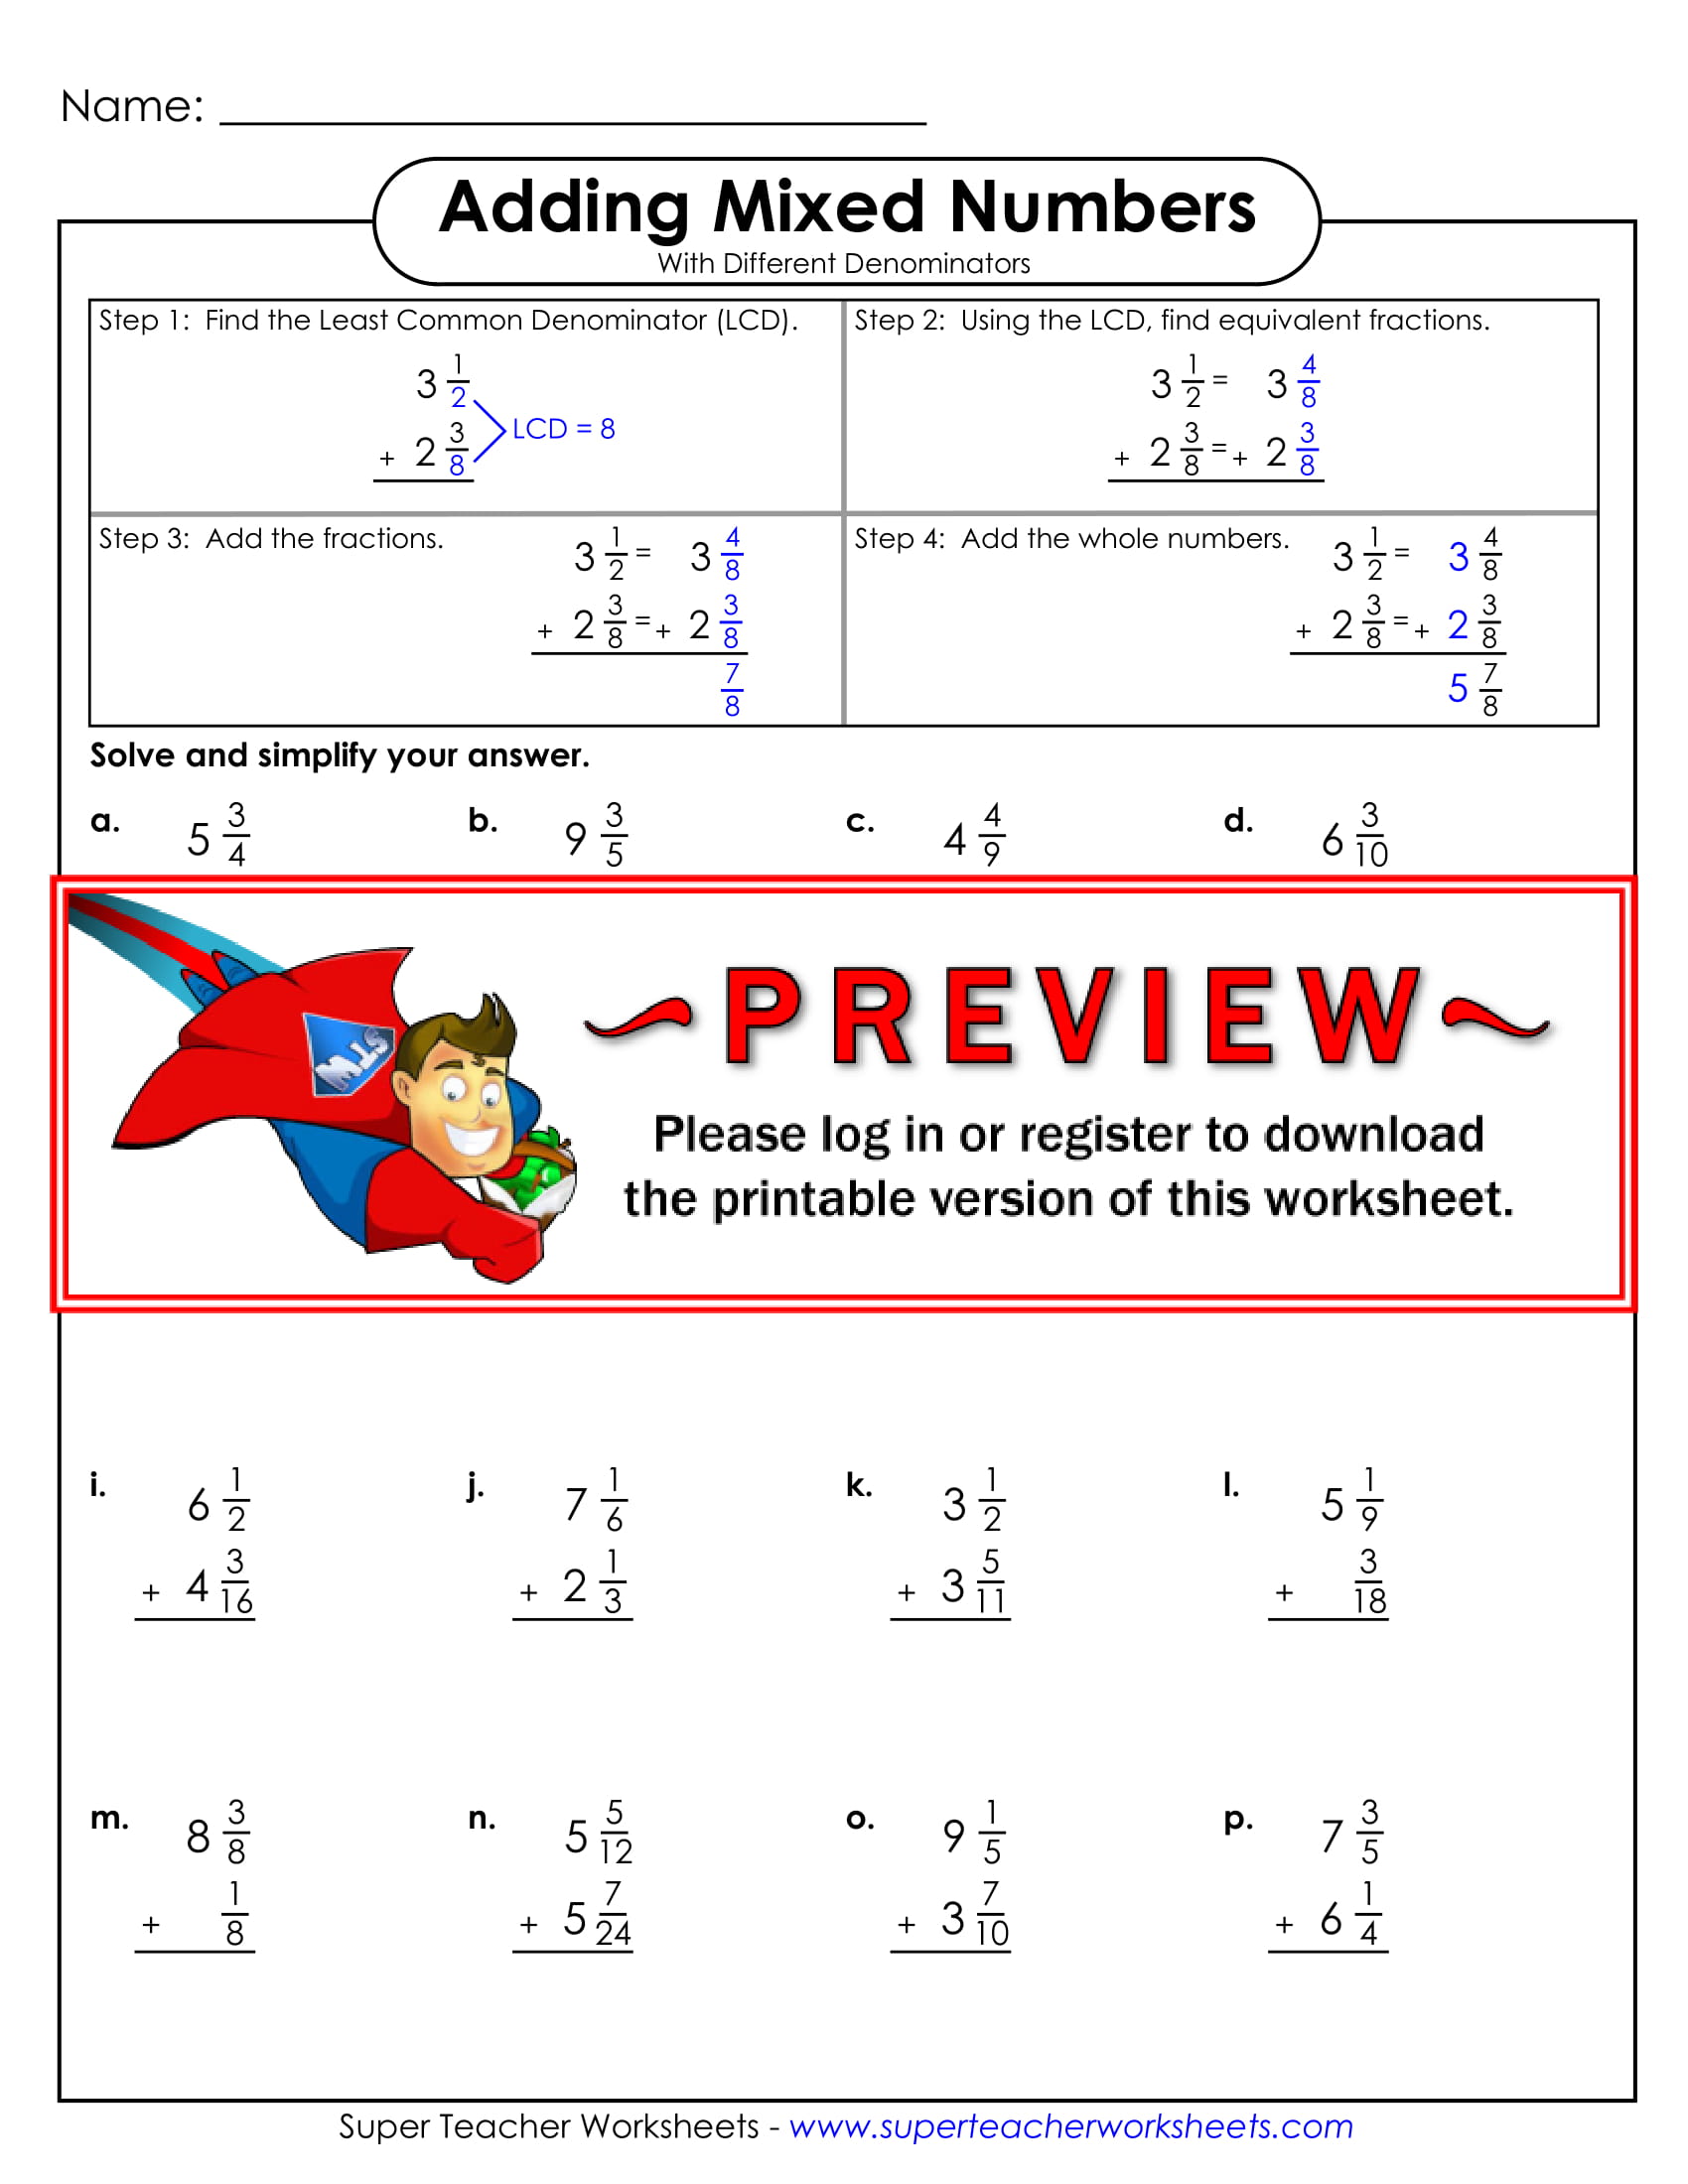 Adding Mixed Numbers Worksheet Math Aids